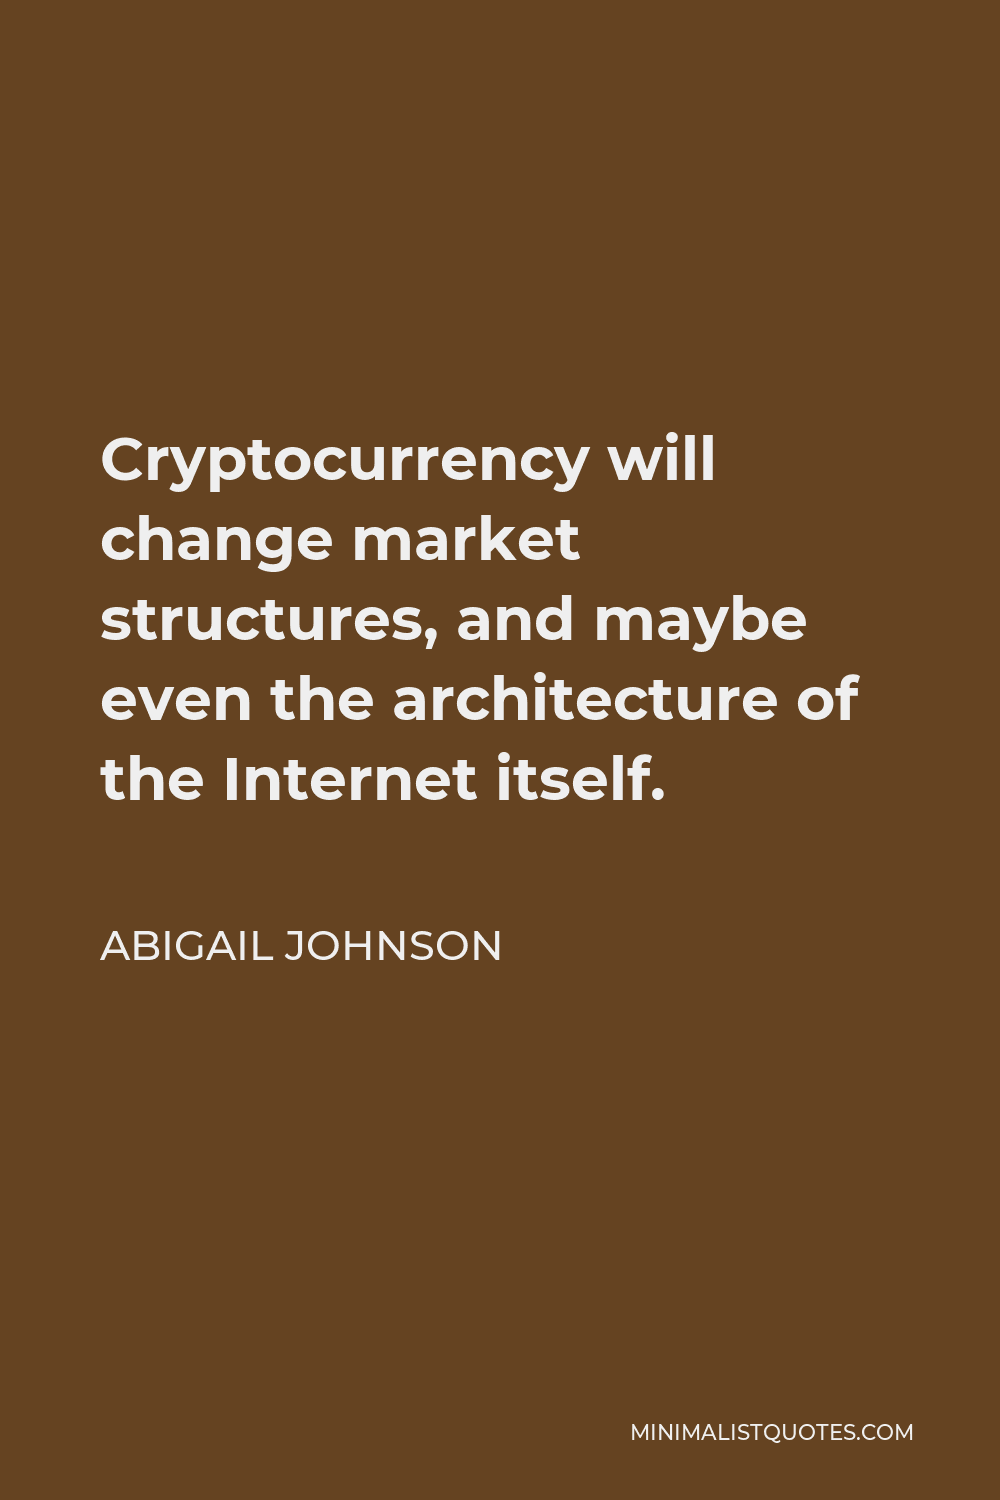 Abigail Johnson Quote - Cryptocurrency will change market structures, and maybe even the architecture of the Internet itself.